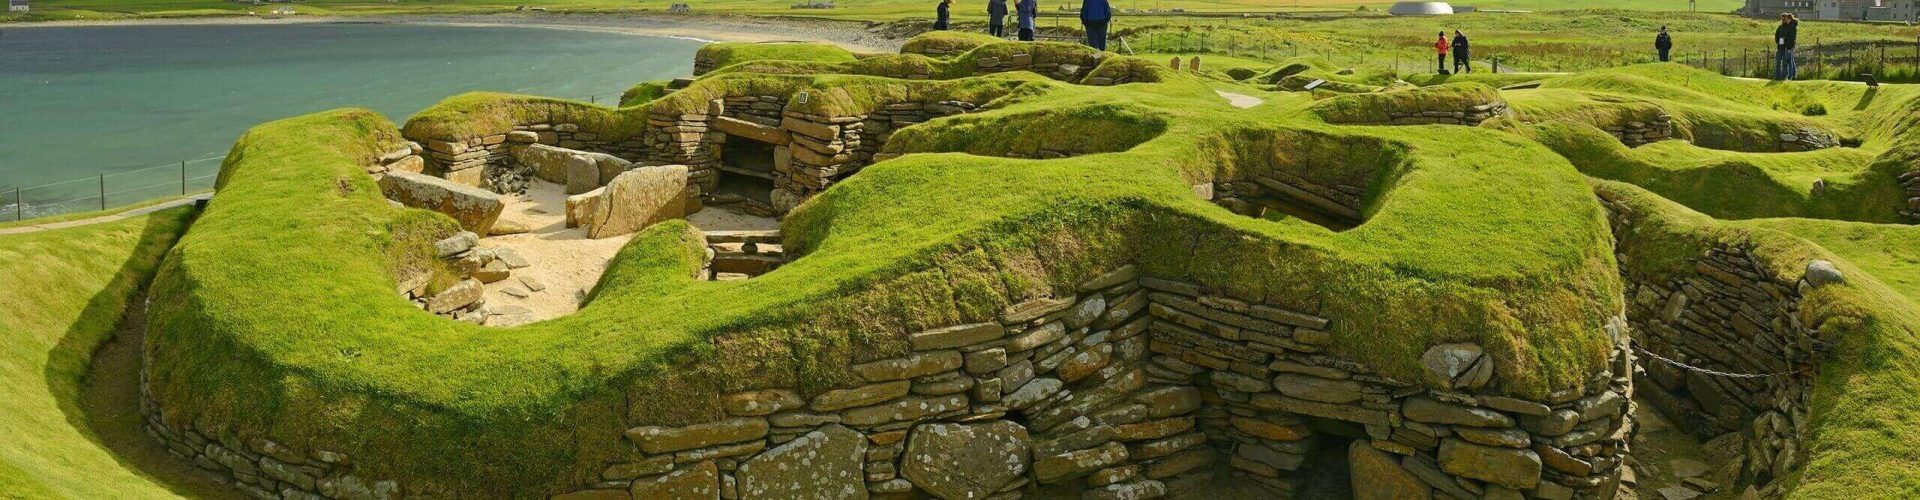 The ancient settlement of Skara Brae on the Isle of Orkney